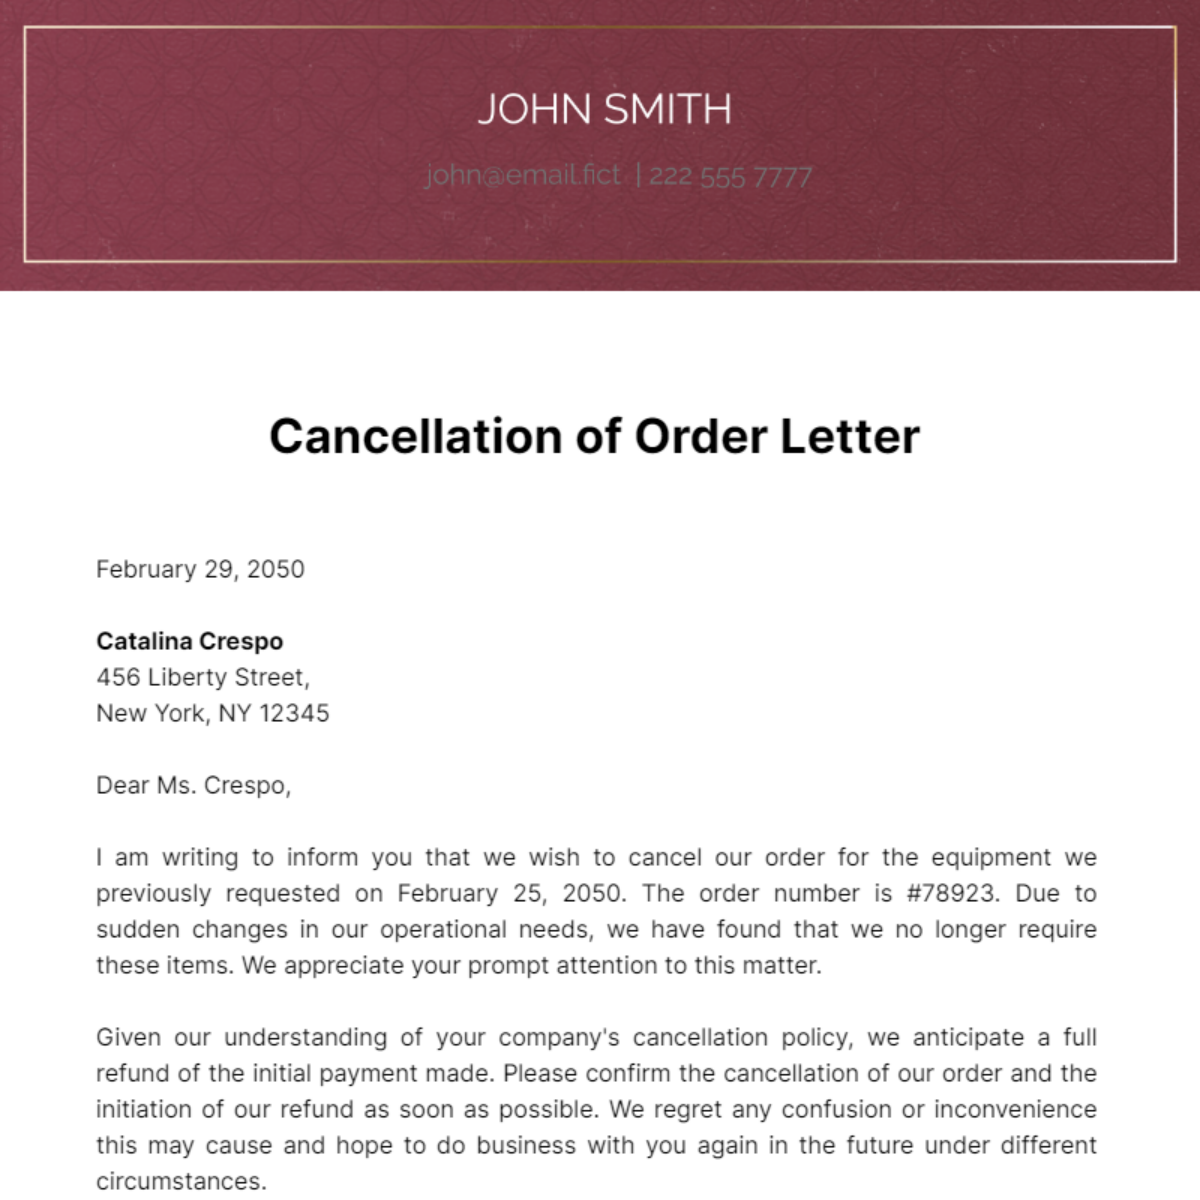 Cancellation of Order Letter Template